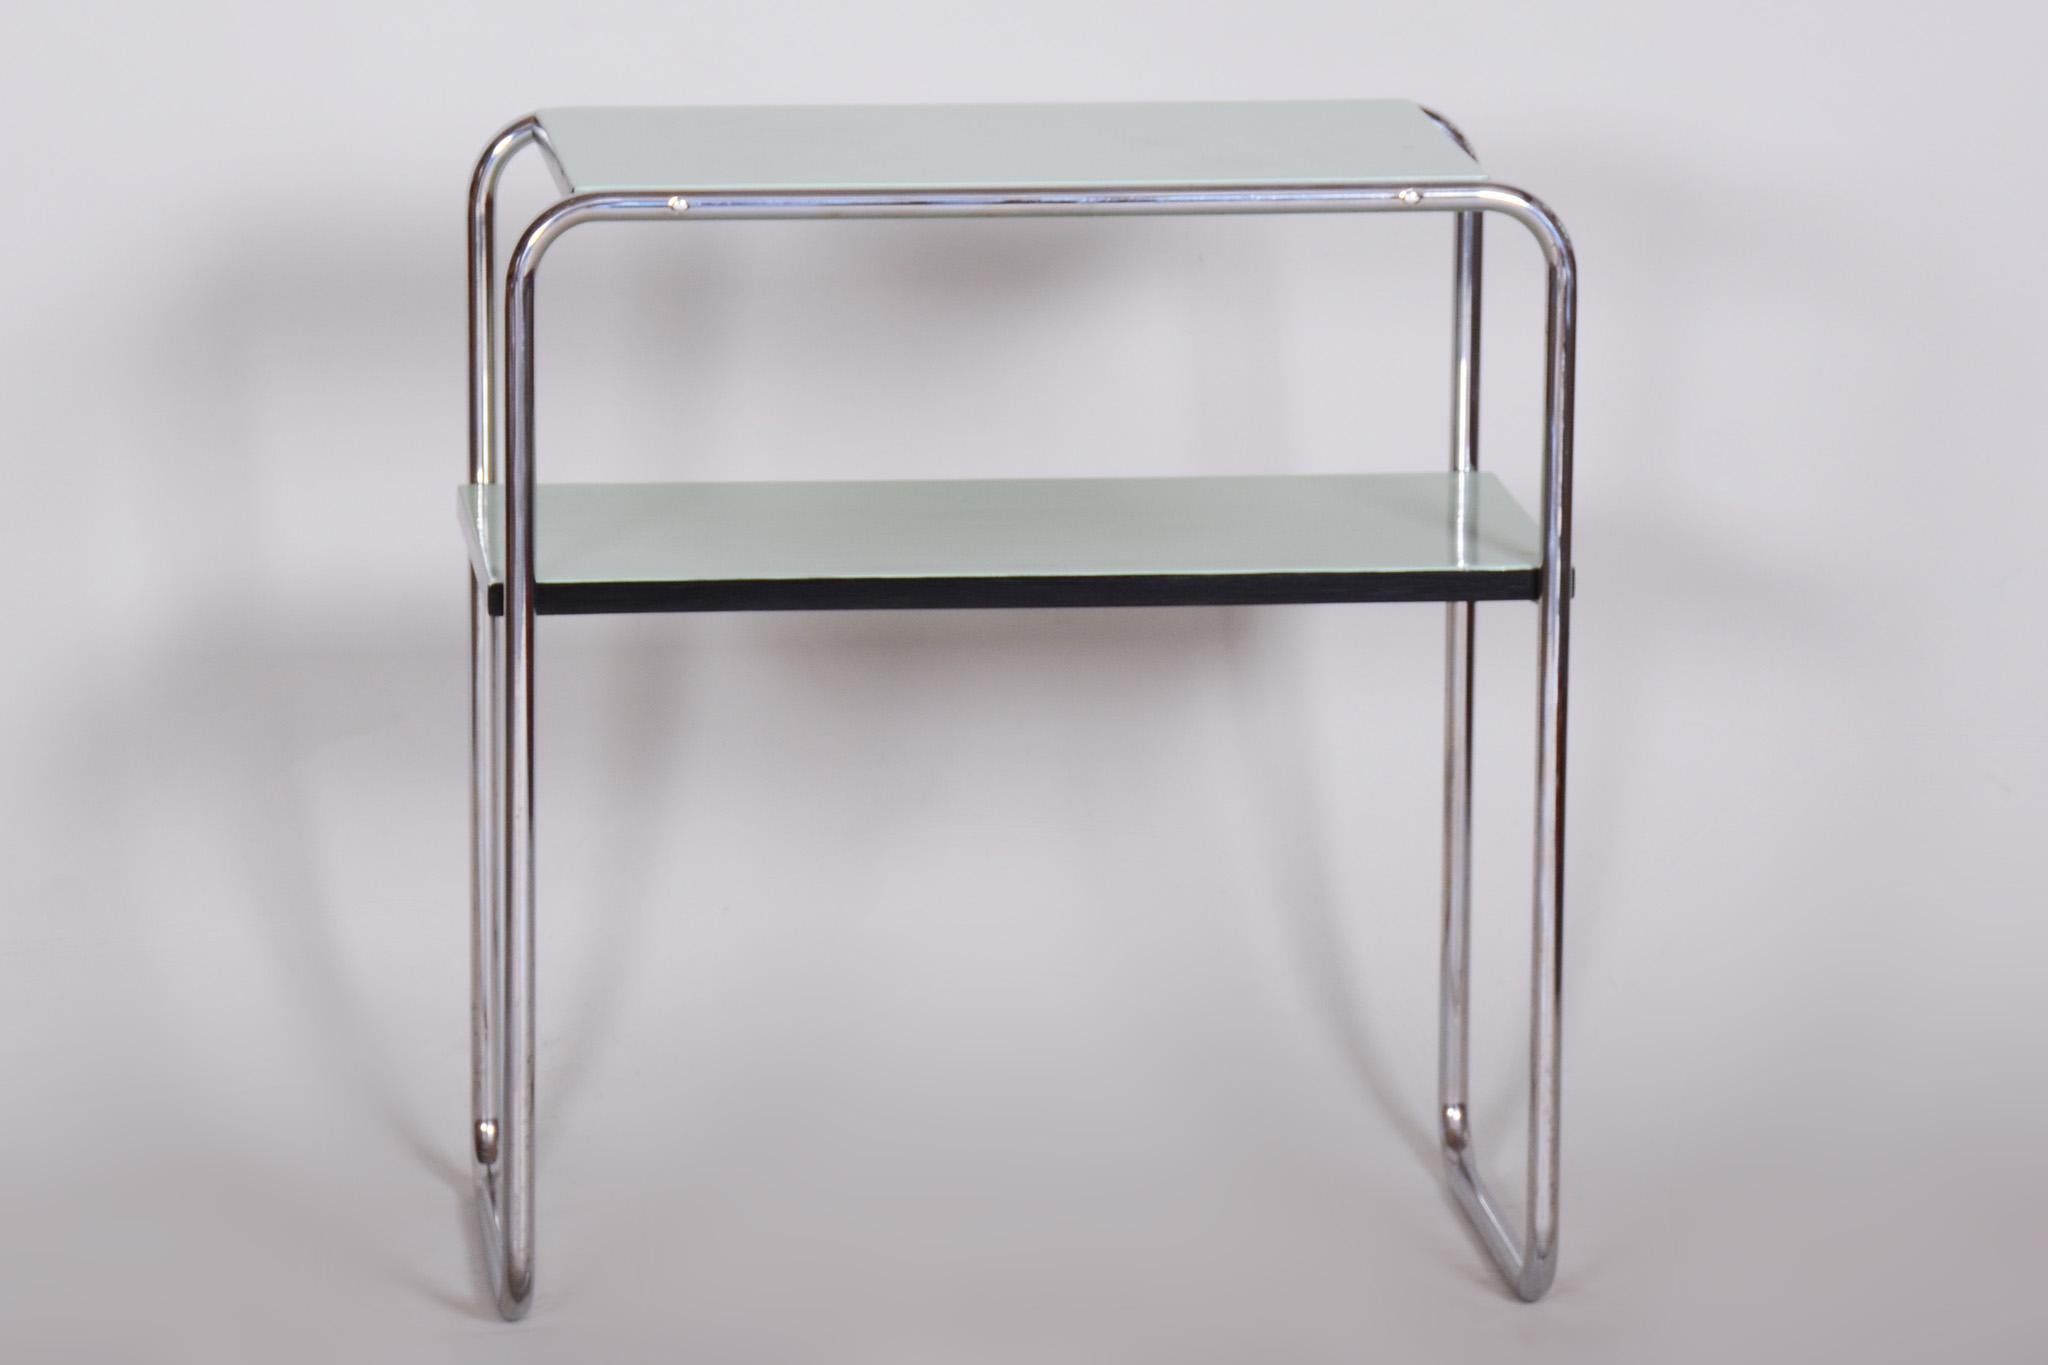 Restored Art Deco side table

Designer: Marcel Breuer
Maker: Thonet
Period: 1930-1939
Source: Germany
Material: Chrome-Plated Steel

Designed by world-renowned German designer, Marcel Breuer.
Made by influential Austrian furniture